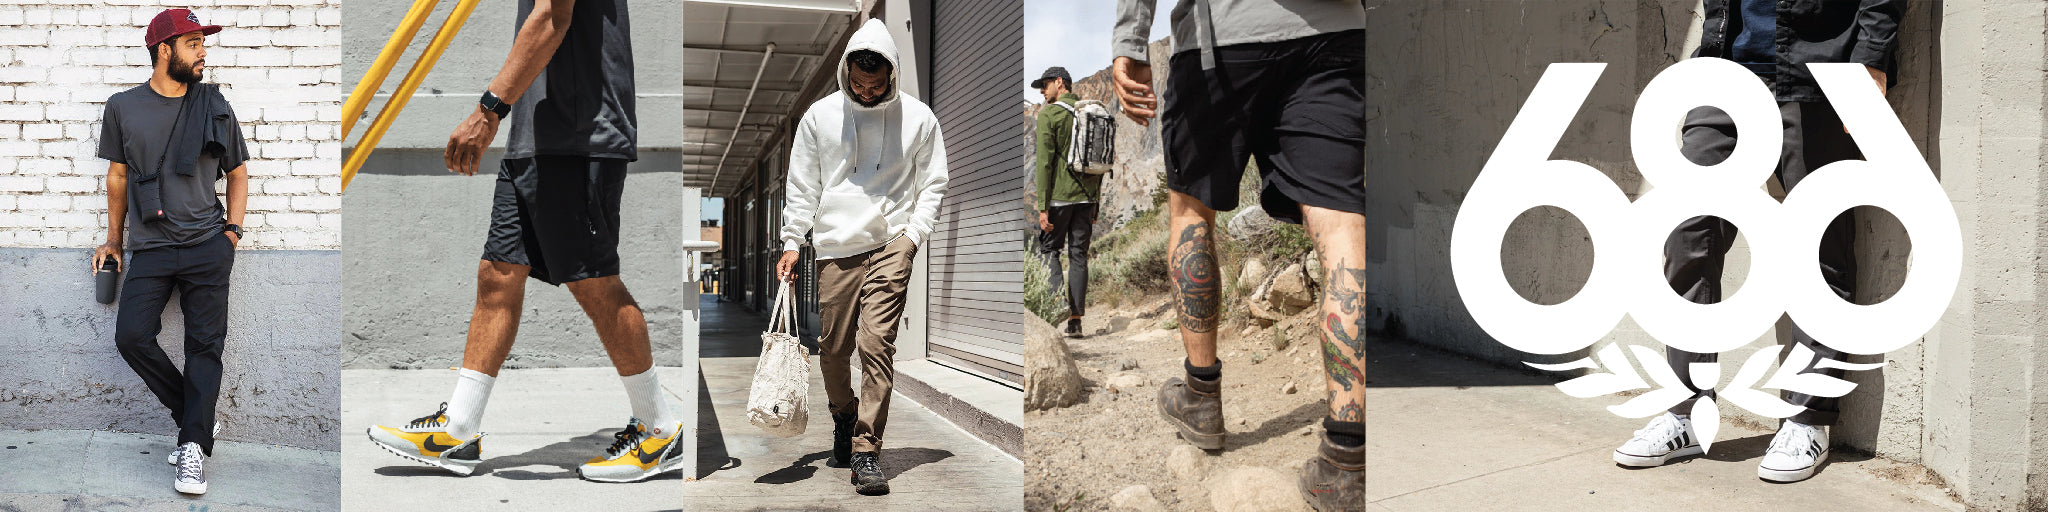 Shop 686 - including the Everywhere Pant and Everywhere Short - online at Sun Diego Boardshops